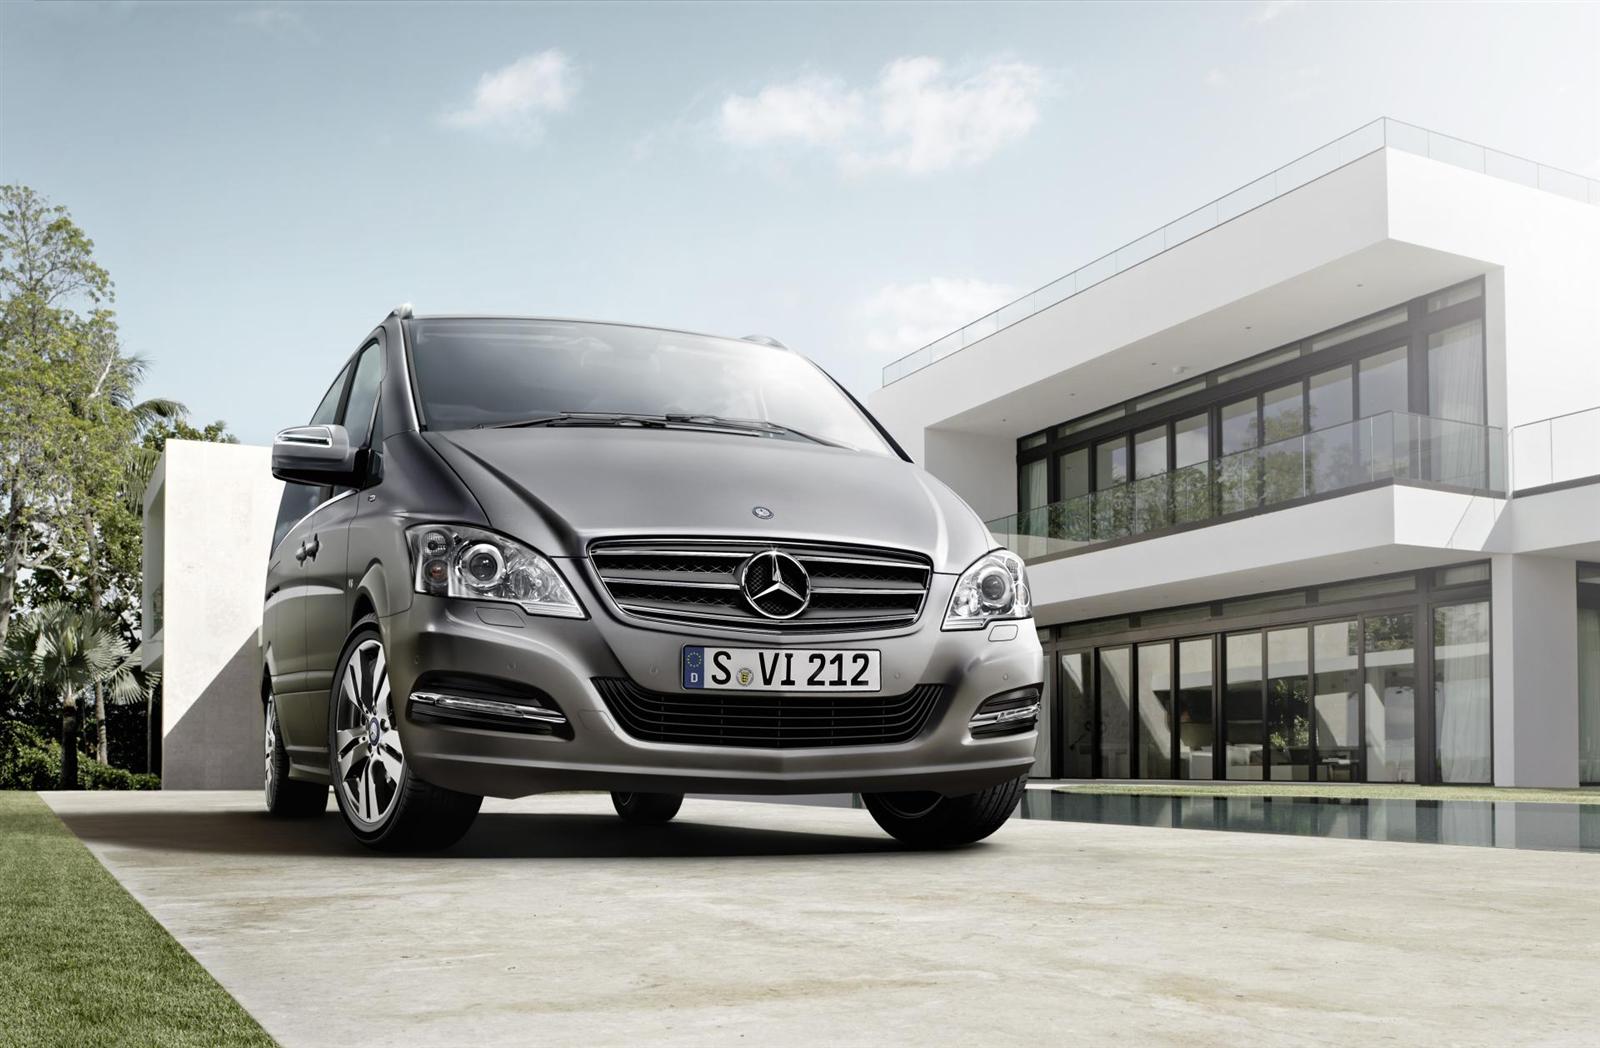 2012 Mercedes-Benz Viano PEARL Limited Edition